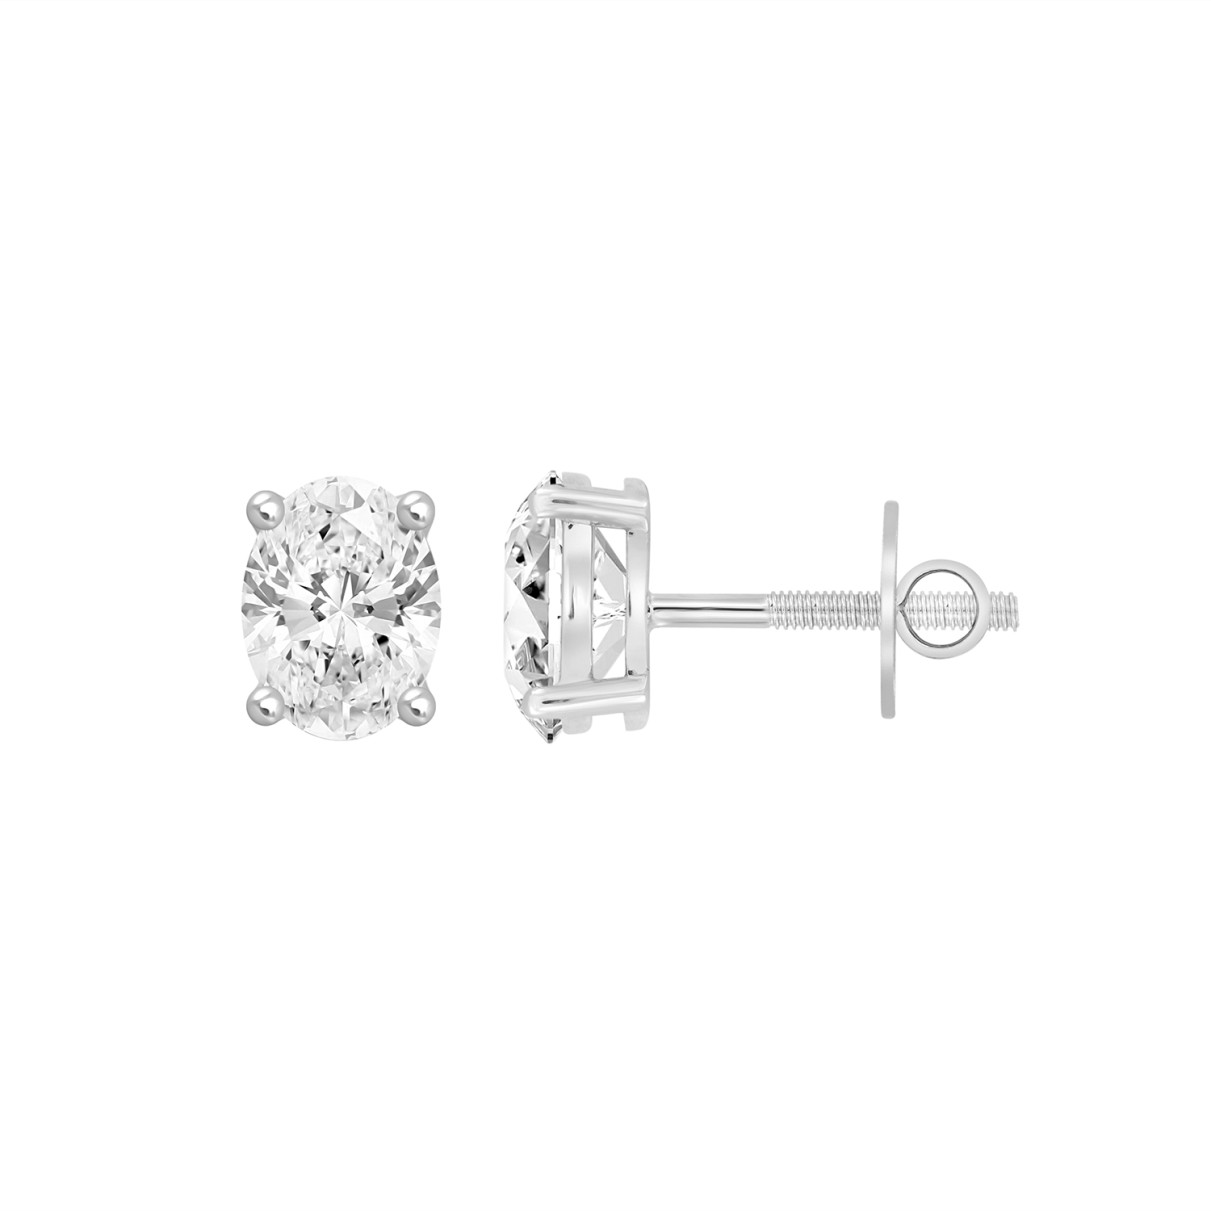 LADIES SOLITAIRE EARRINGS  1CT OVAL DIAMOND 14K WHITE GOLD